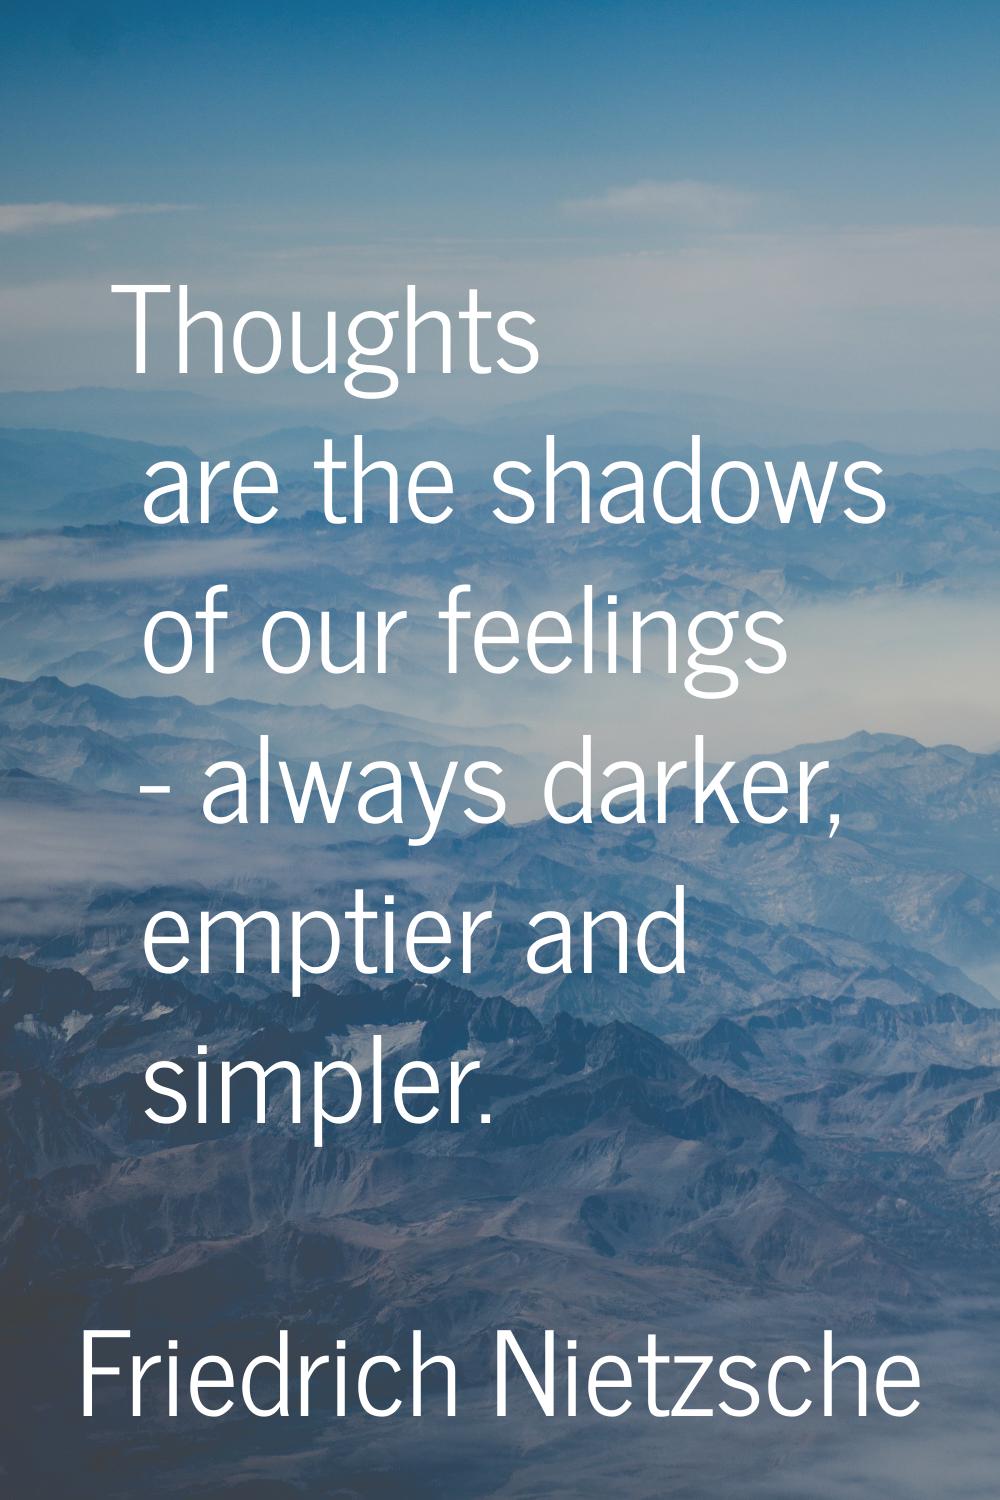 Thoughts are the shadows of our feelings - always darker, emptier and simpler.